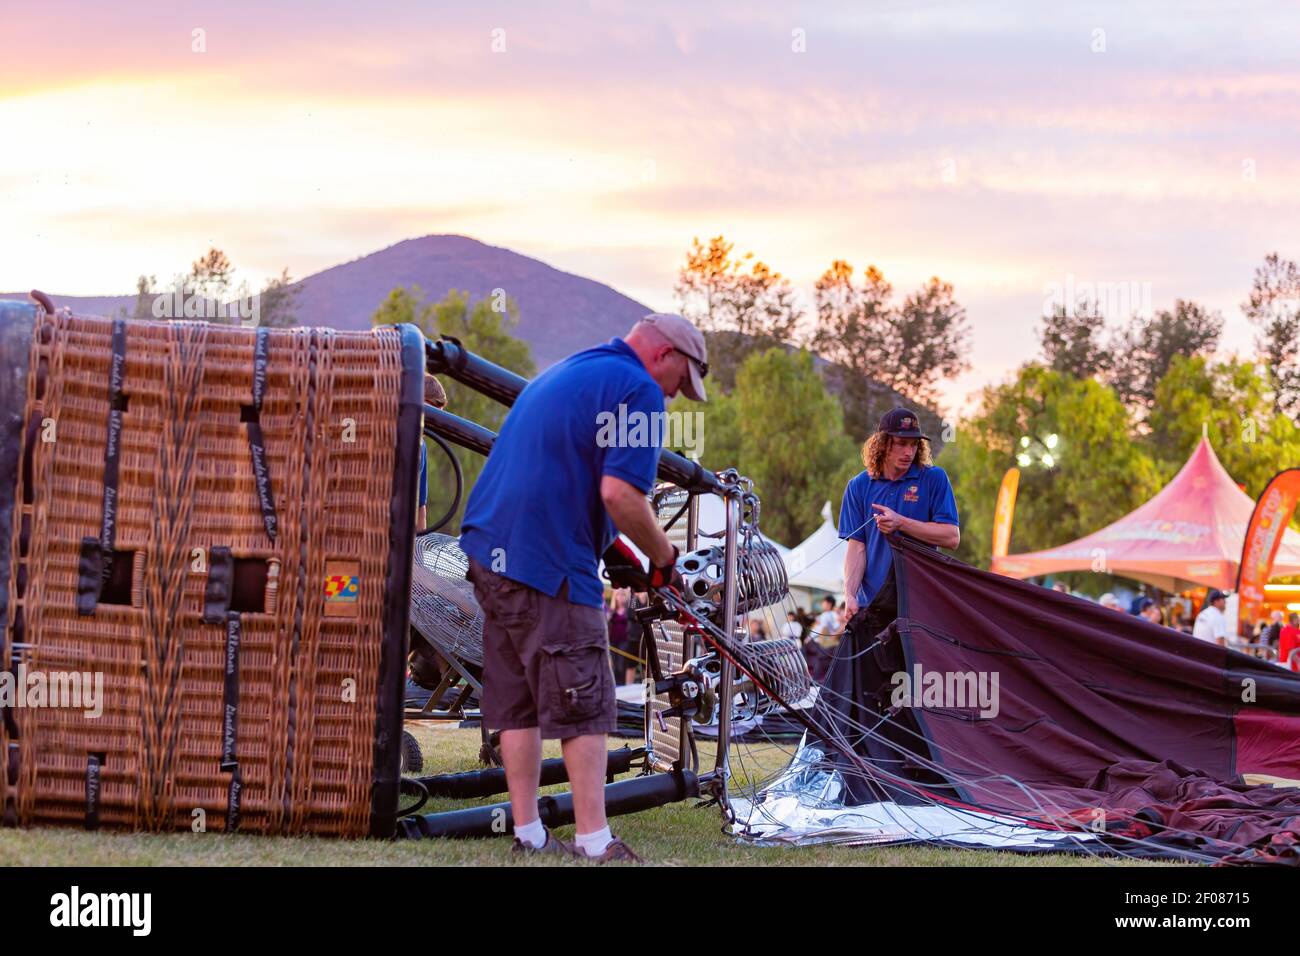 Temecula, MAY 29, 2015 - Worker is preparing the hot air balloon for the Temecula Valley Balloon and Wine Festival Stock Photo